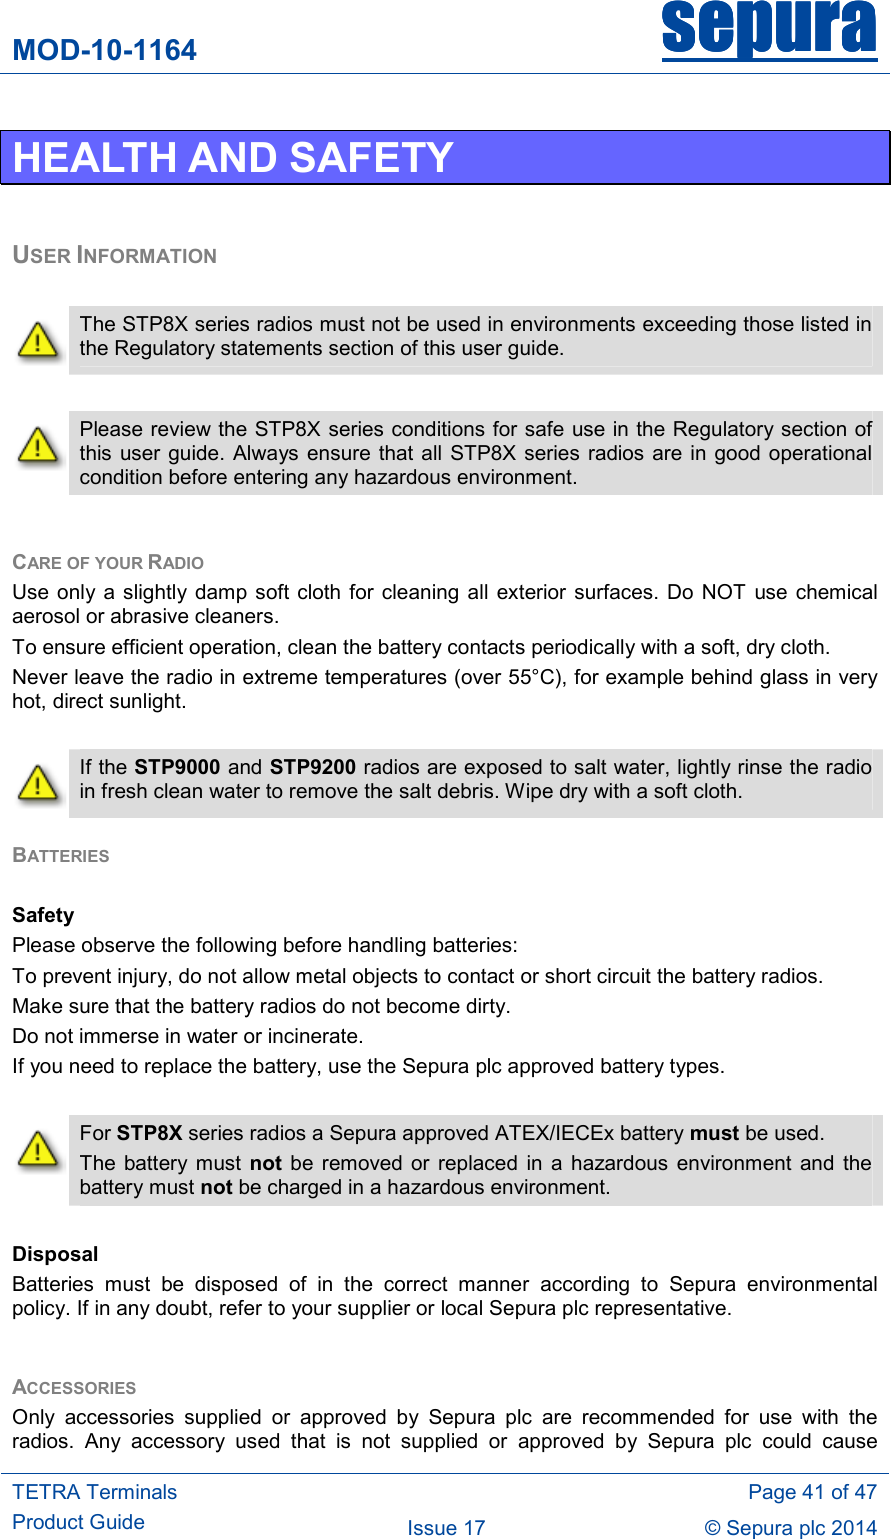 MOD-10-1164 sepurasepurasepurasepura     TETRA Terminals Product Guide   Page 41 of 47 Issue 17  © Sepura plc 2014   HEALTH AND SAFETY  USER INFORMATION   The STP8X series radios must not be used in environments exceeding those listed in the Regulatory statements section of this user guide.   Please review the STP8X  series conditions for safe use in the Regulatory section of this user guide. Always ensure  that all  STP8X series radios are in good operational condition before entering any hazardous environment.  CARE OF YOUR RADIO Use only  a  slightly damp  soft cloth  for  cleaning all  exterior surfaces. Do NOT  use  chemical aerosol or abrasive cleaners.  To ensure efficient operation, clean the battery contacts periodically with a soft, dry cloth. Never leave the radio in extreme temperatures (over 55°C), for example behind glass in very hot, direct sunlight.   If the STP9000 and STP9200 radios are exposed to salt water, lightly rinse the radio in fresh clean water to remove the salt debris. Wipe dry with a soft cloth. BATTERIES   Safety Please observe the following before handling batteries: To prevent injury, do not allow metal objects to contact or short circuit the battery radios. Make sure that the battery radios do not become dirty. Do not immerse in water or incinerate. If you need to replace the battery, use the Sepura plc approved battery types.   For STP8X series radios a Sepura approved ATEX/IECEx battery must be used. The  battery must  not be  removed  or  replaced  in  a hazardous  environment  and  the battery must not be charged in a hazardous environment.  Disposal Batteries  must  be  disposed  of  in  the  correct  manner  according  to  Sepura  environmental policy. If in any doubt, refer to your supplier or local Sepura plc representative.  ACCESSORIES Only  accessories  supplied  or  approved  by  Sepura  plc  are  recommended  for  use  with  the radios.  Any  accessory  used  that  is  not  supplied  or  approved  by  Sepura  plc  could  cause 